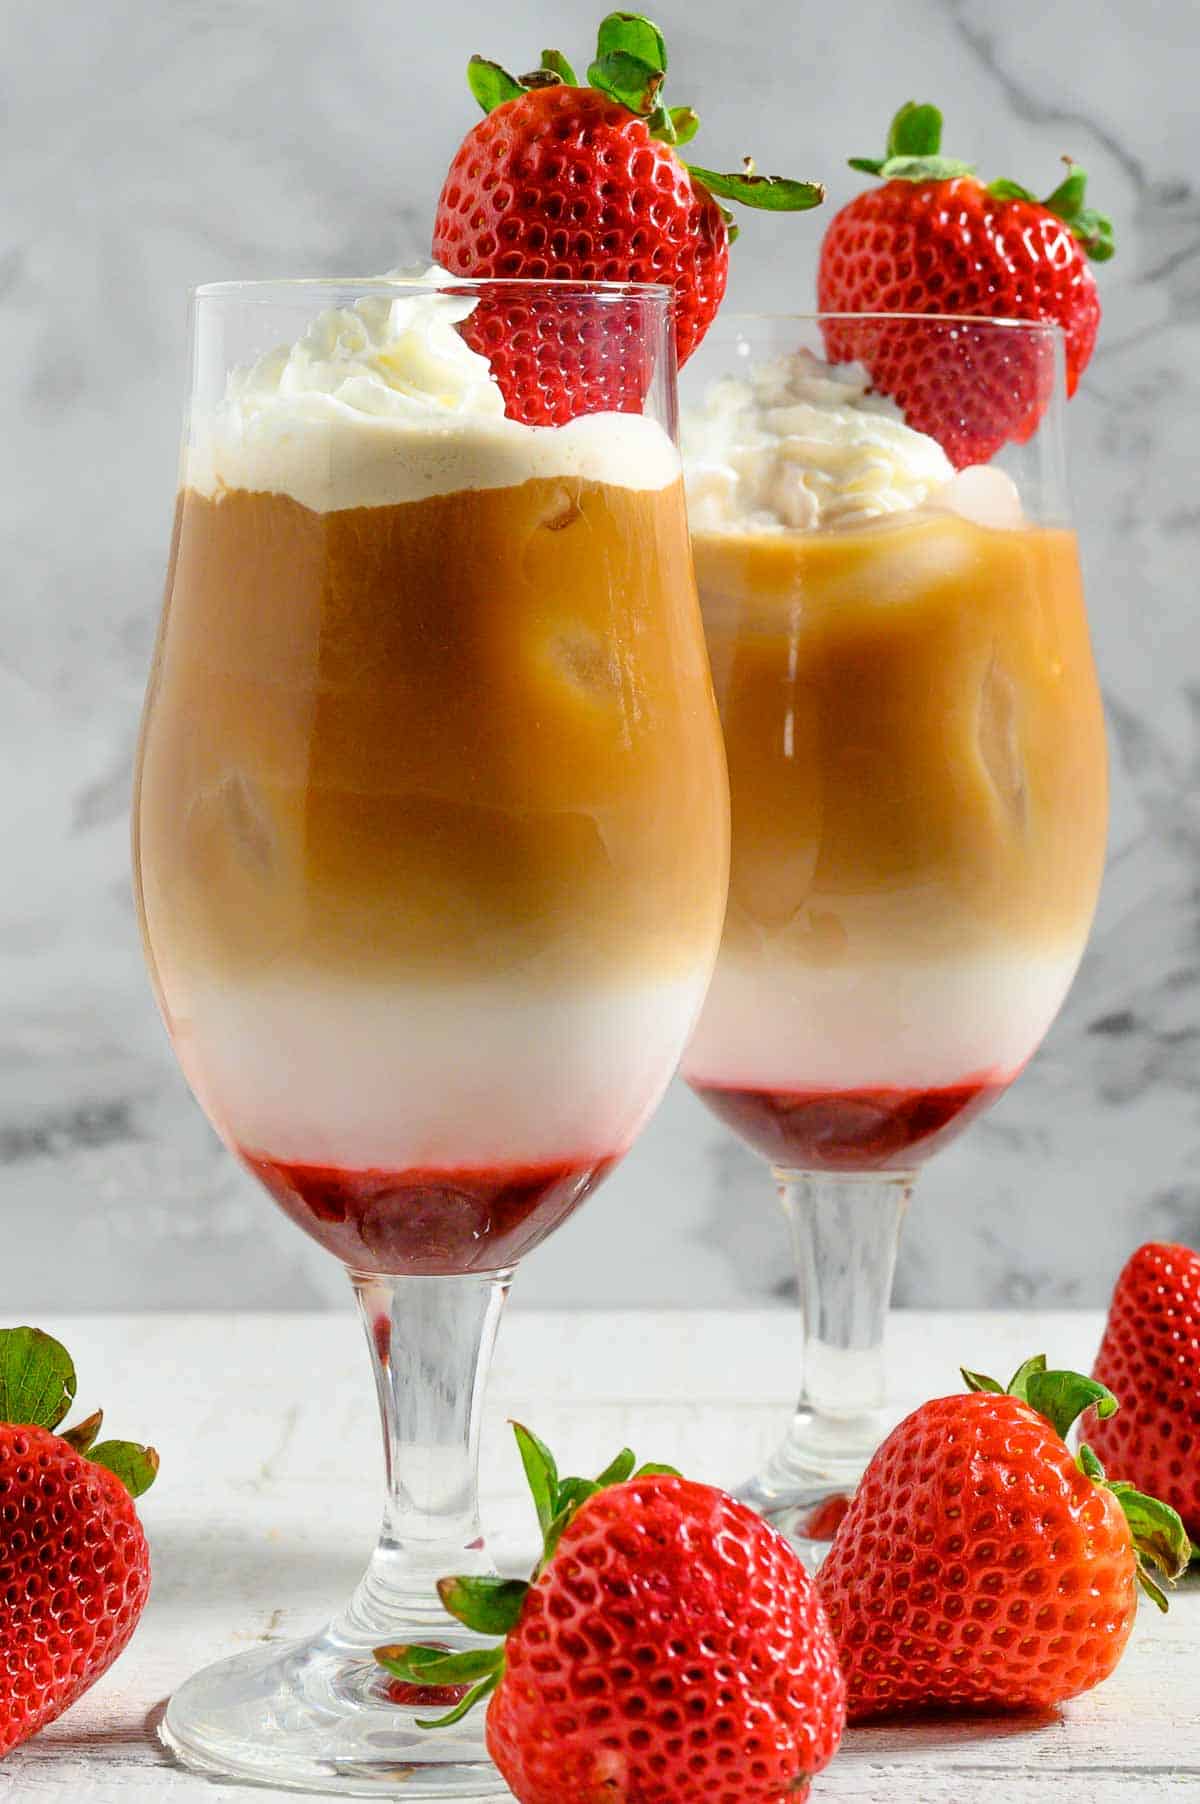 Easy Iced Strawberry Latte topped with whipped cream and a fresh strawberry.